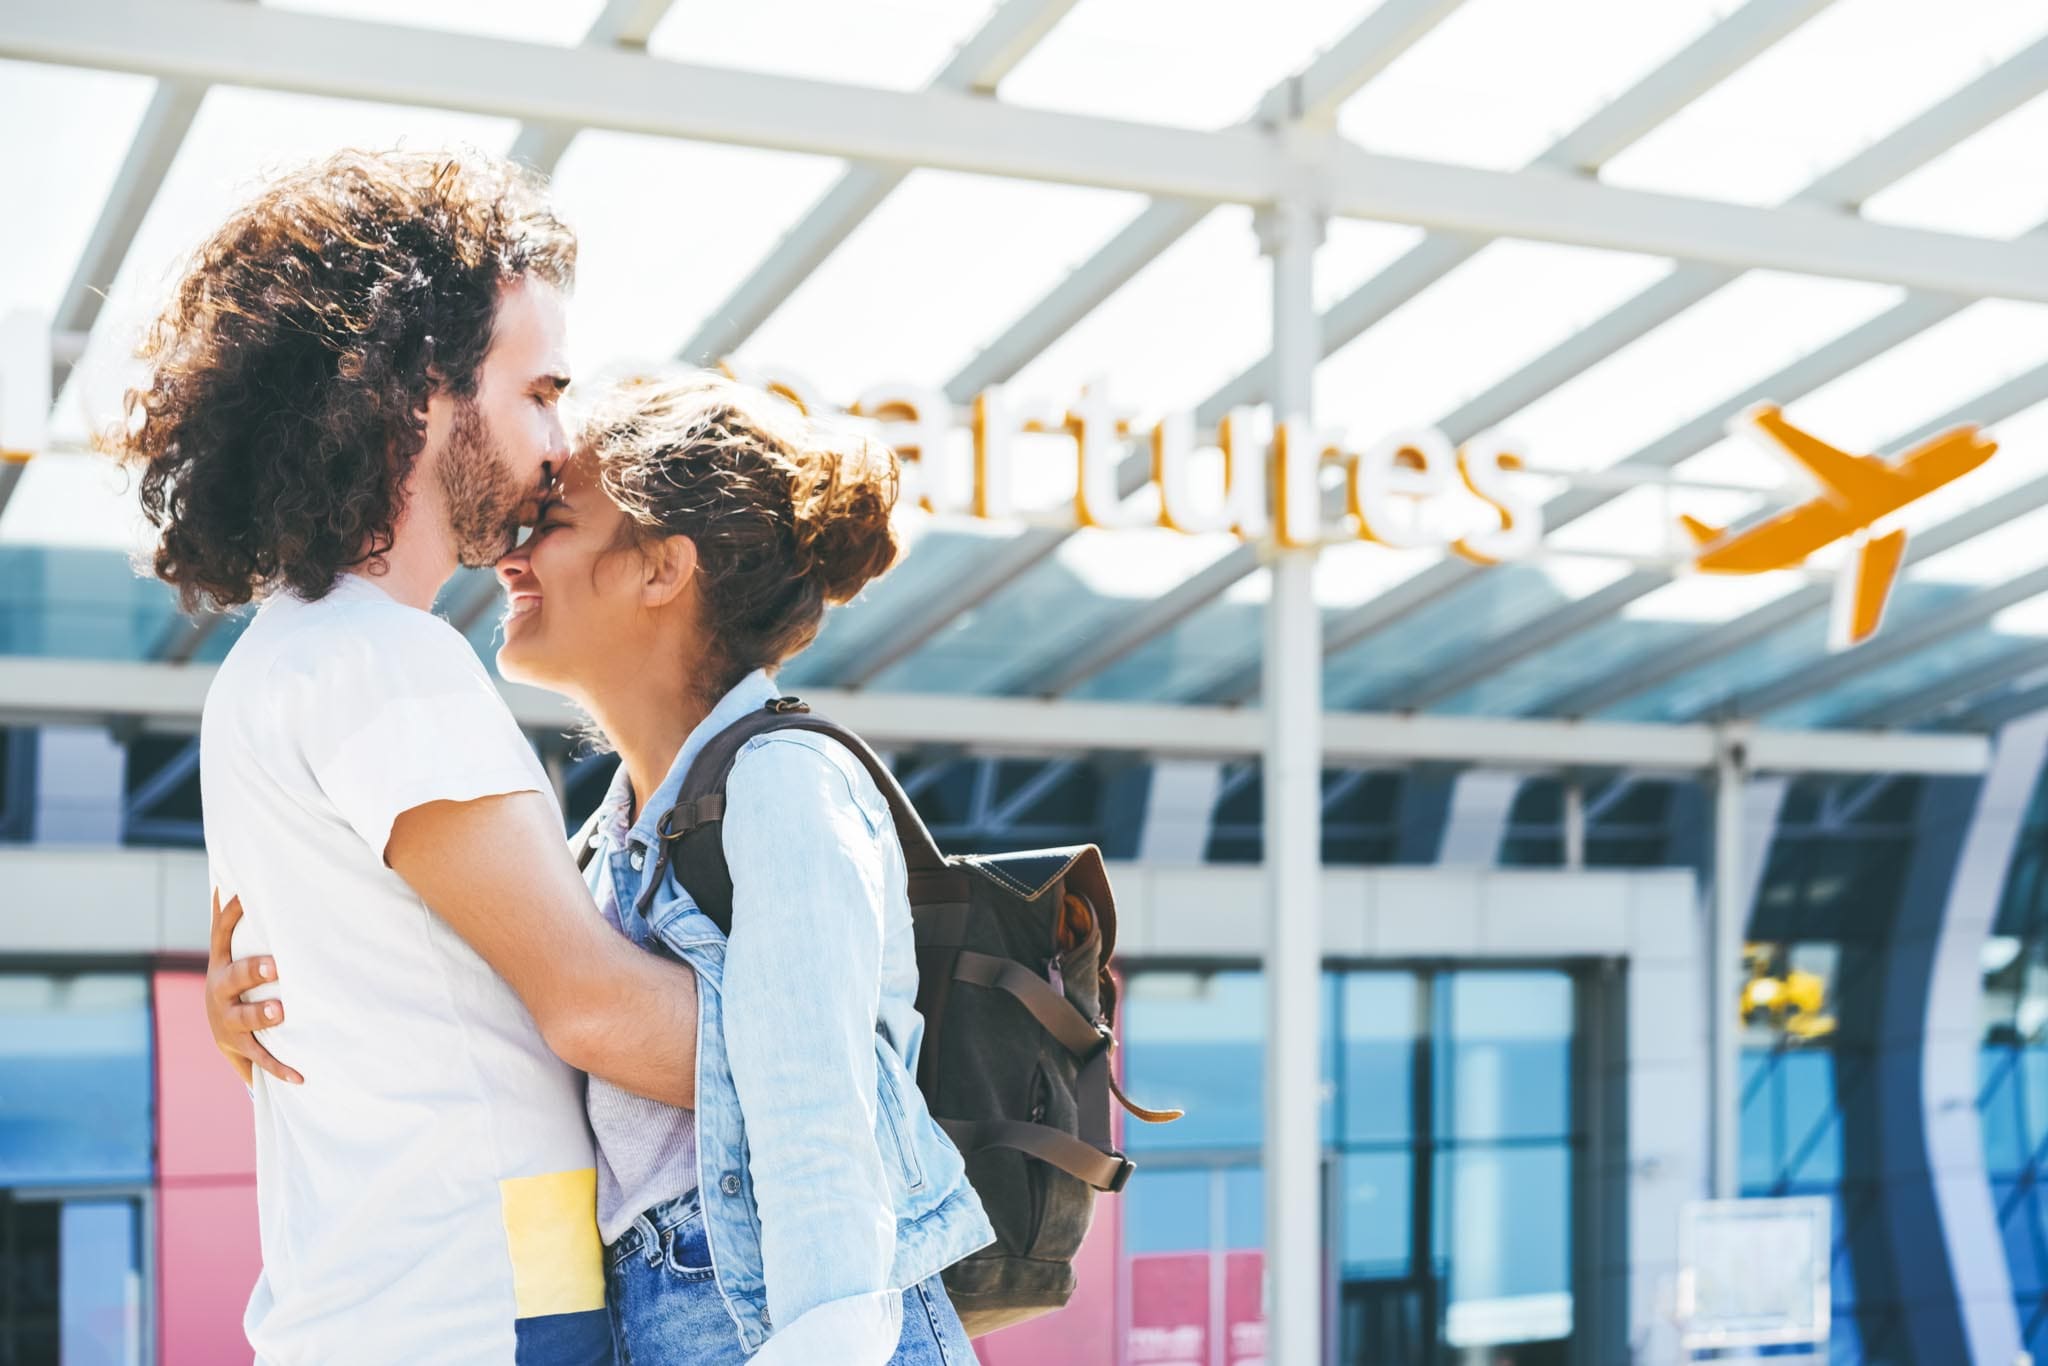 Things to know before moving to another country for love